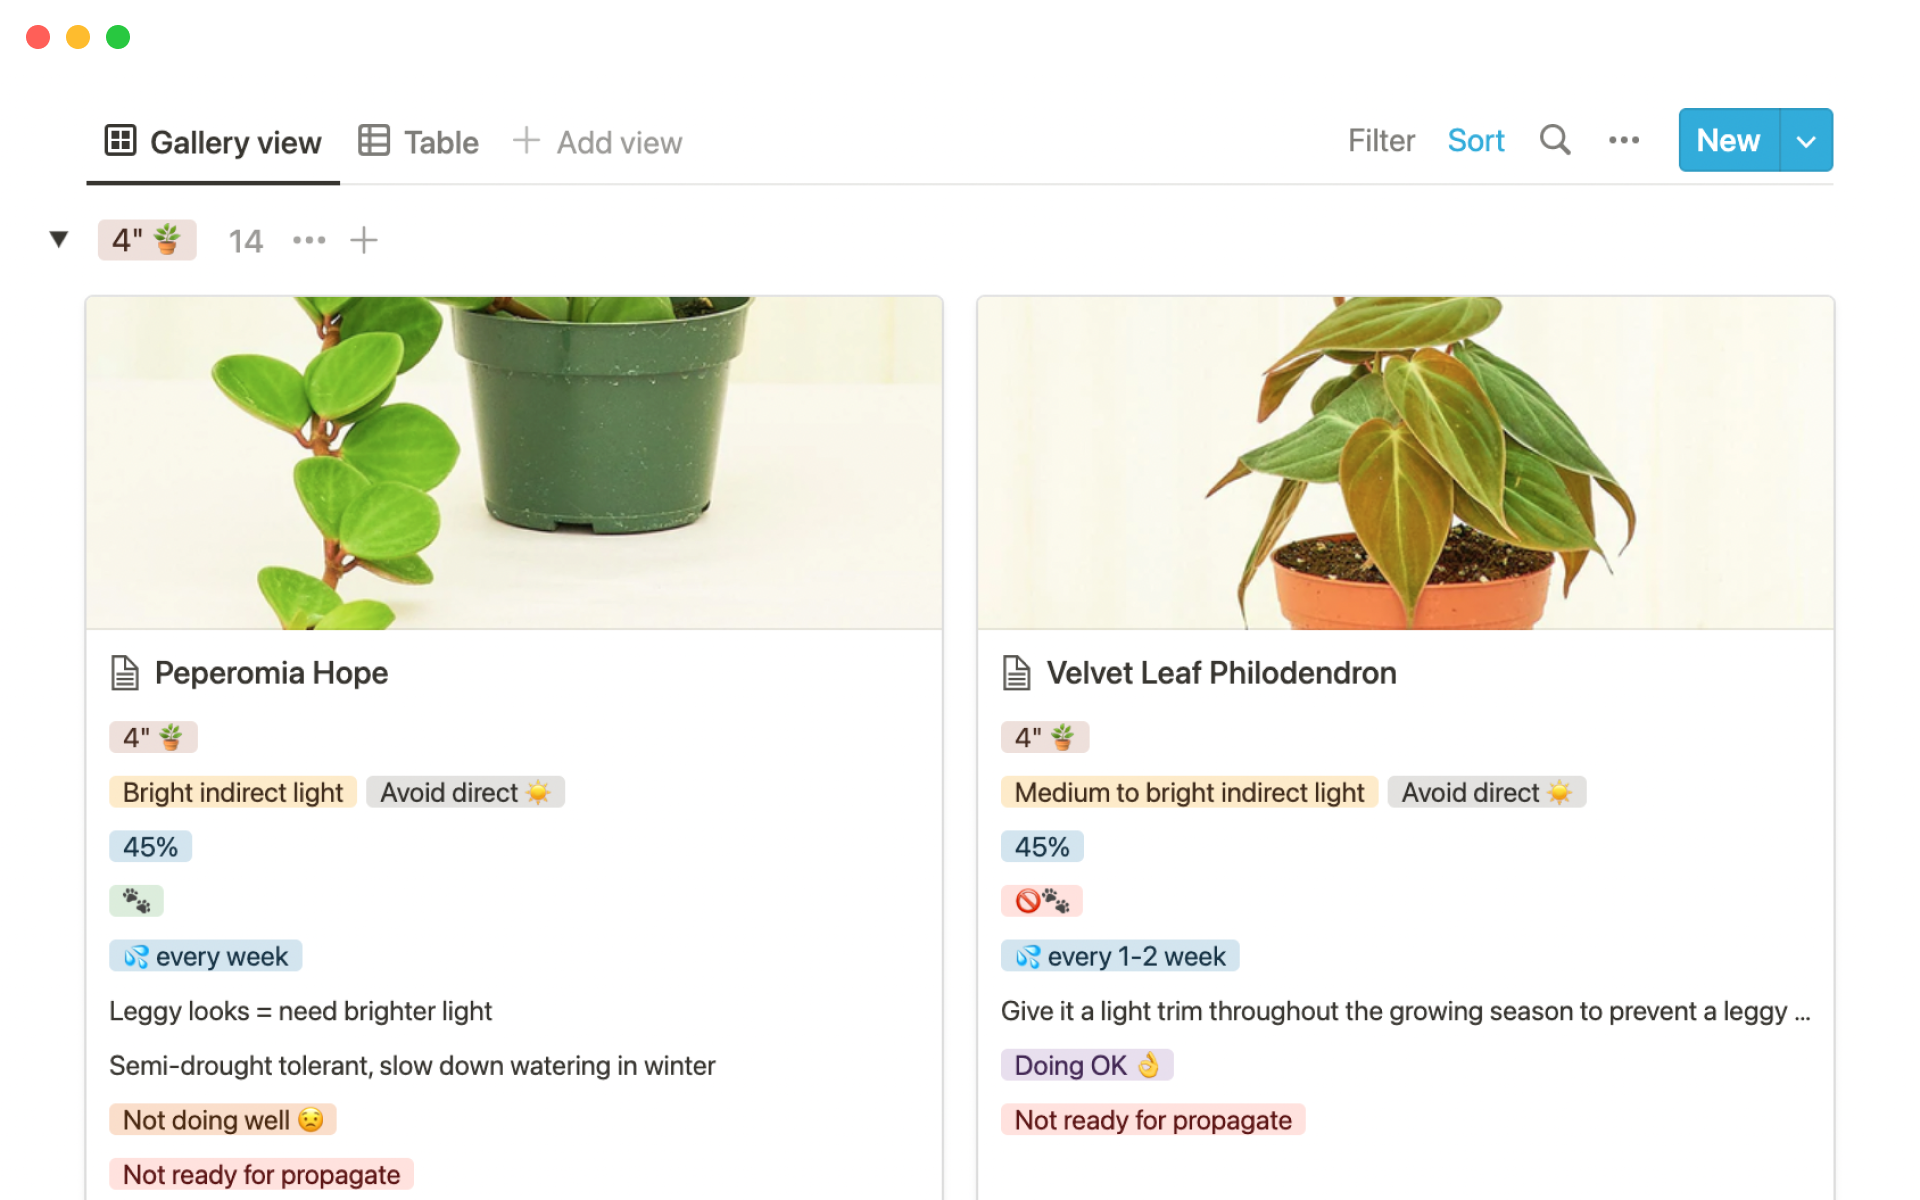 Keep track of your plant collection and manage each one's care information.